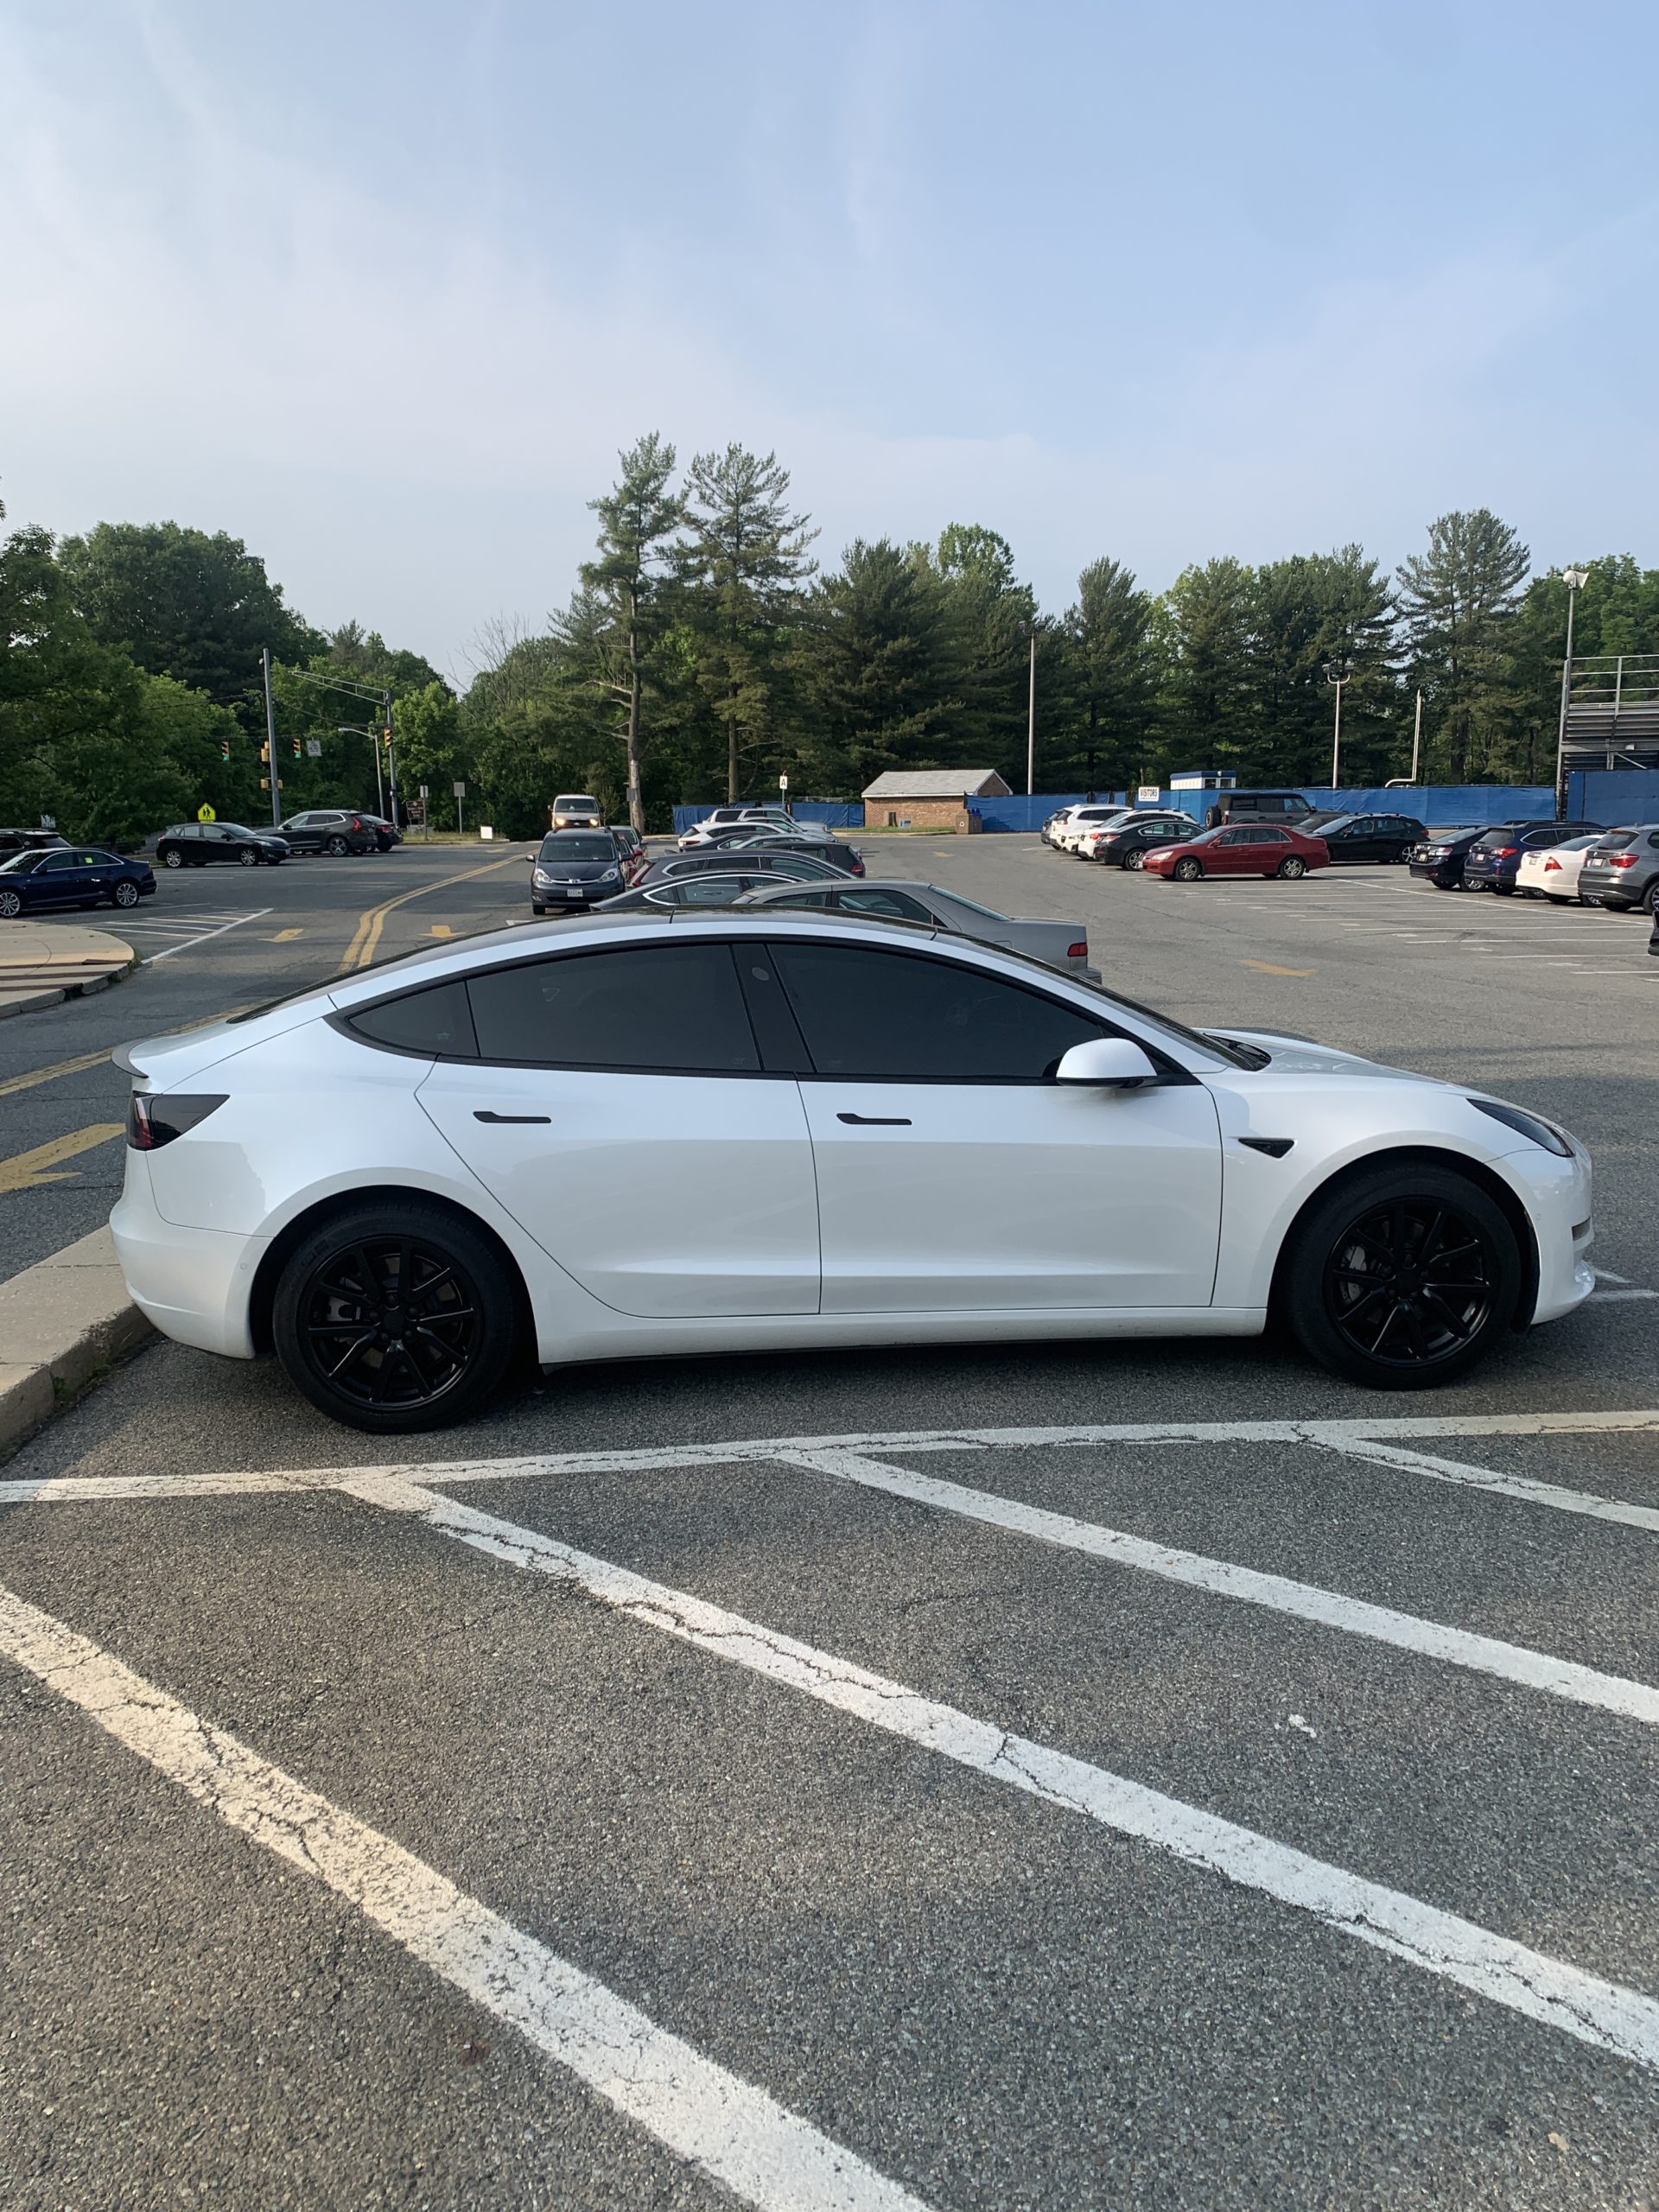 Electric teslas have become increasingly common sights in the parking lot.